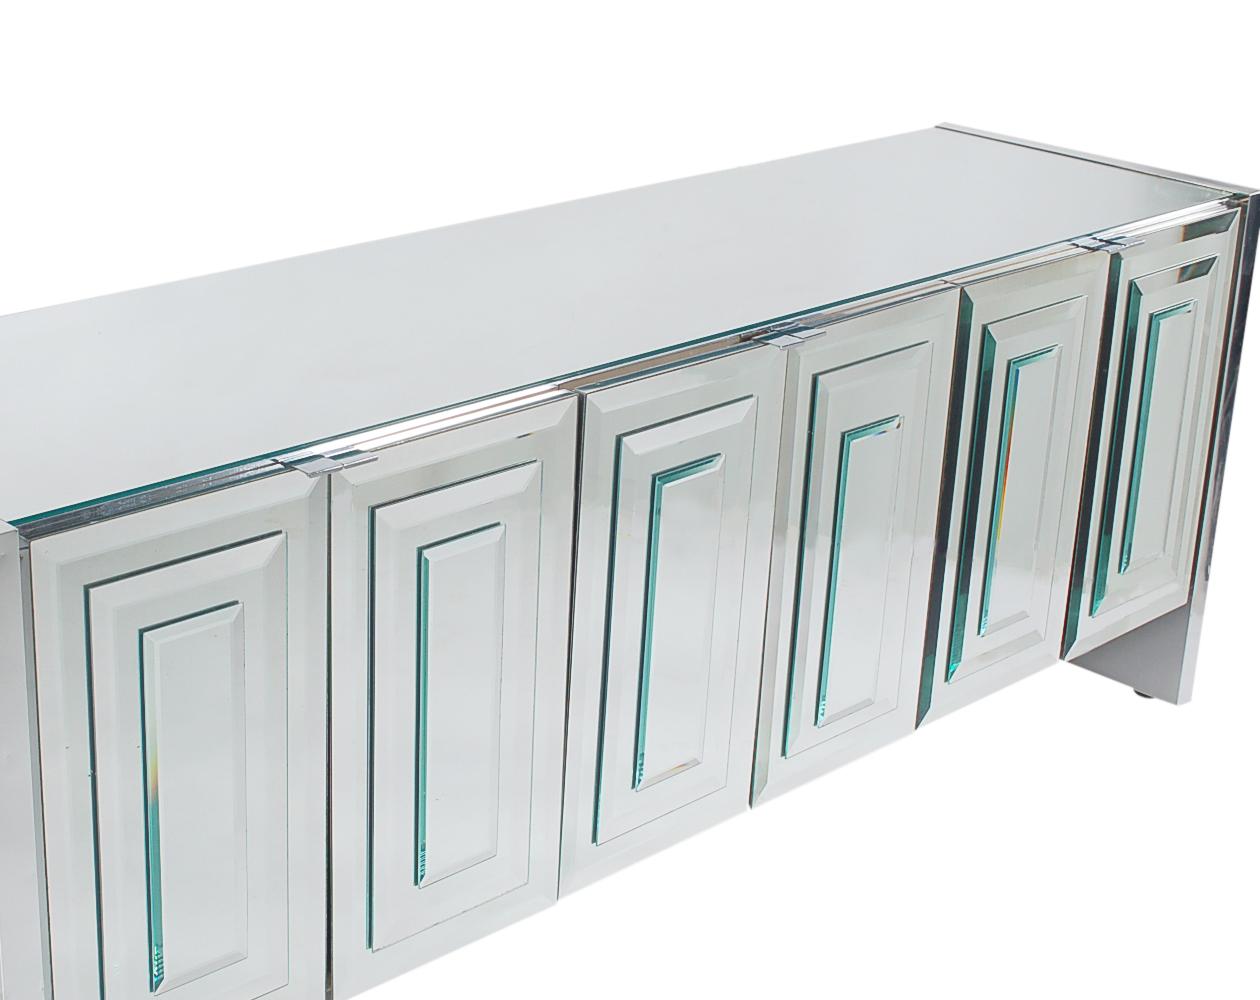 American Hollywood Regency Modern Mirrored Art Deco Credenza or Cabinet by Ello Furniture